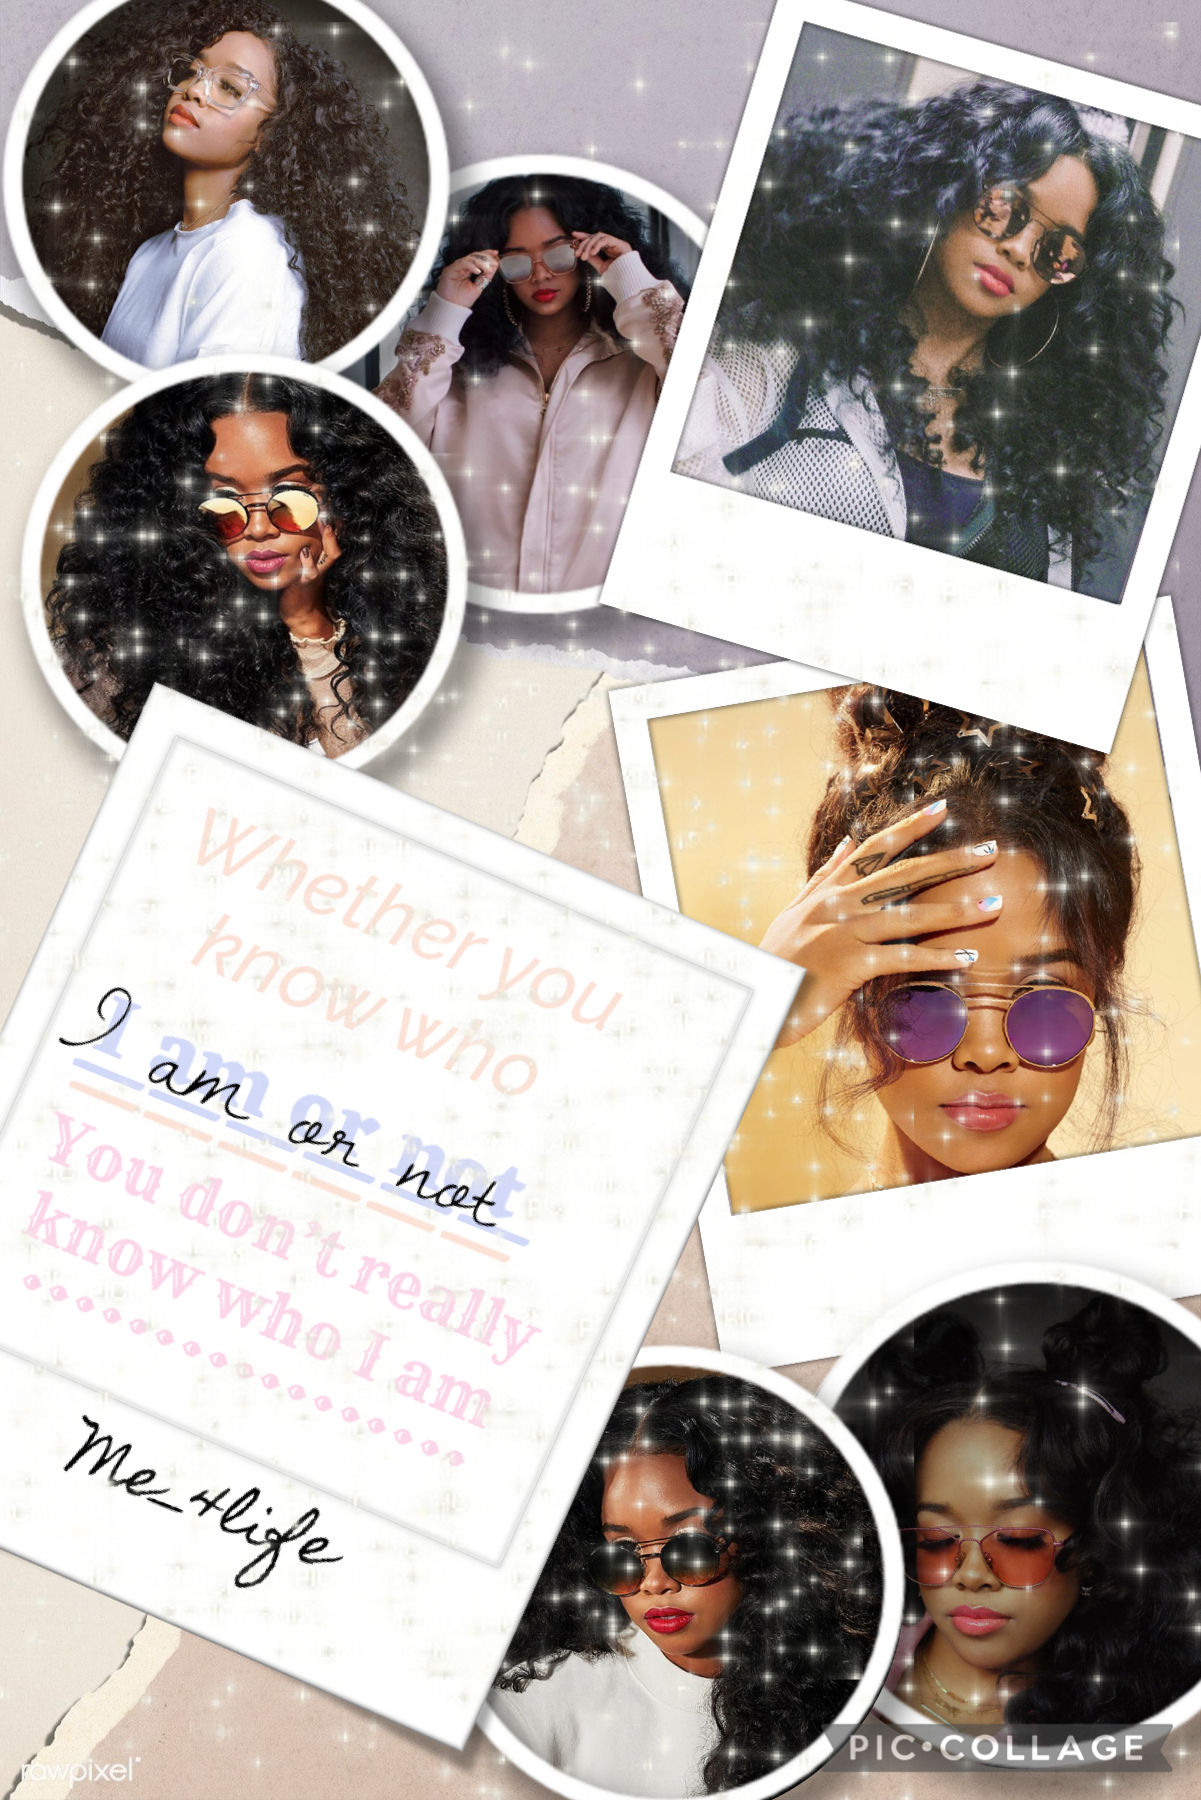 H.E.R✨✨
I haven’t posted a collage I made that’s not a collab in a while lol. How are you guys?